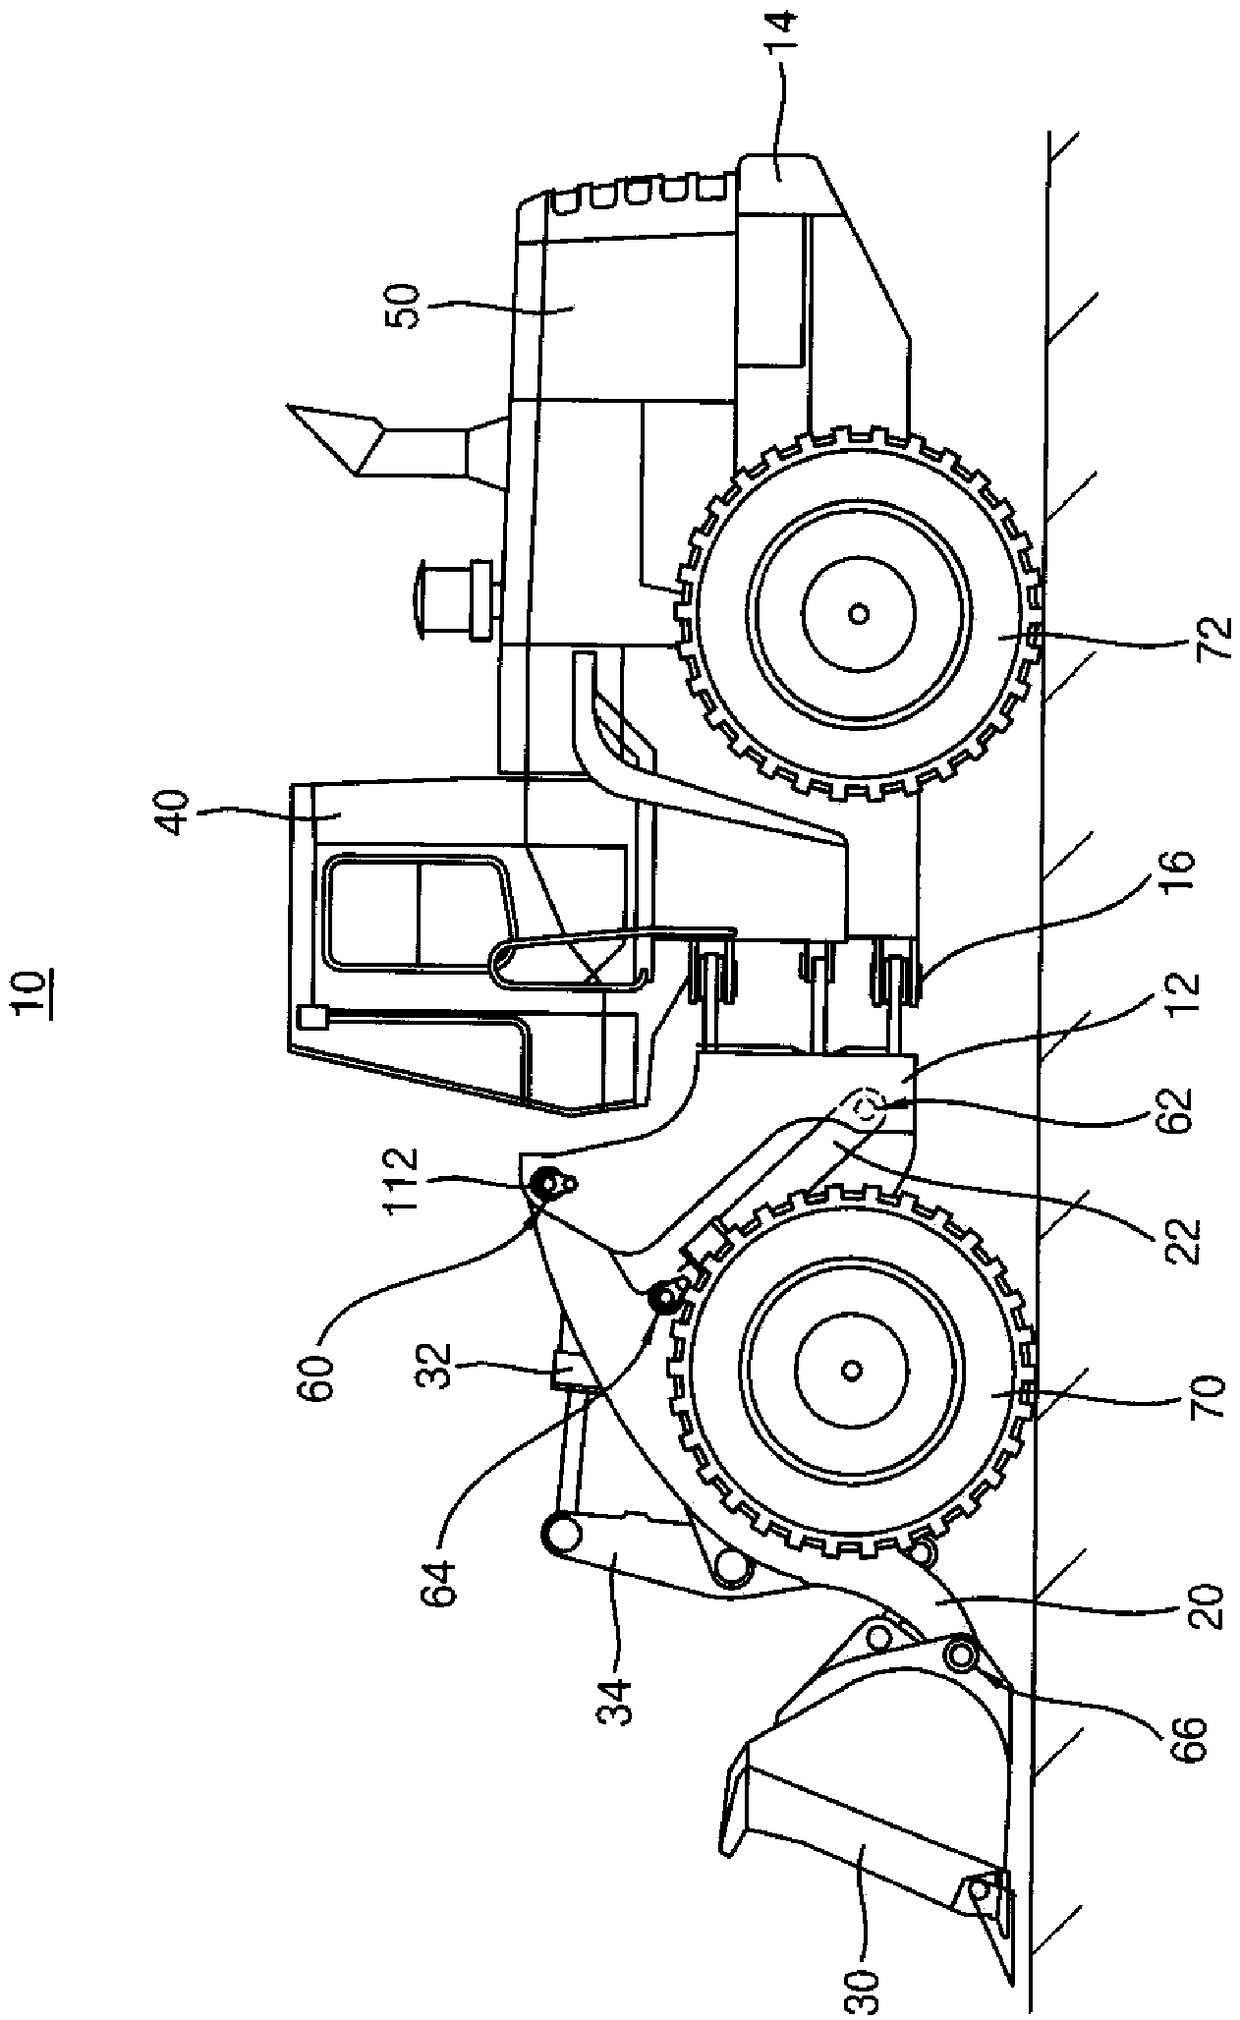 Loading weight measuring method and measuring system of wheel loader